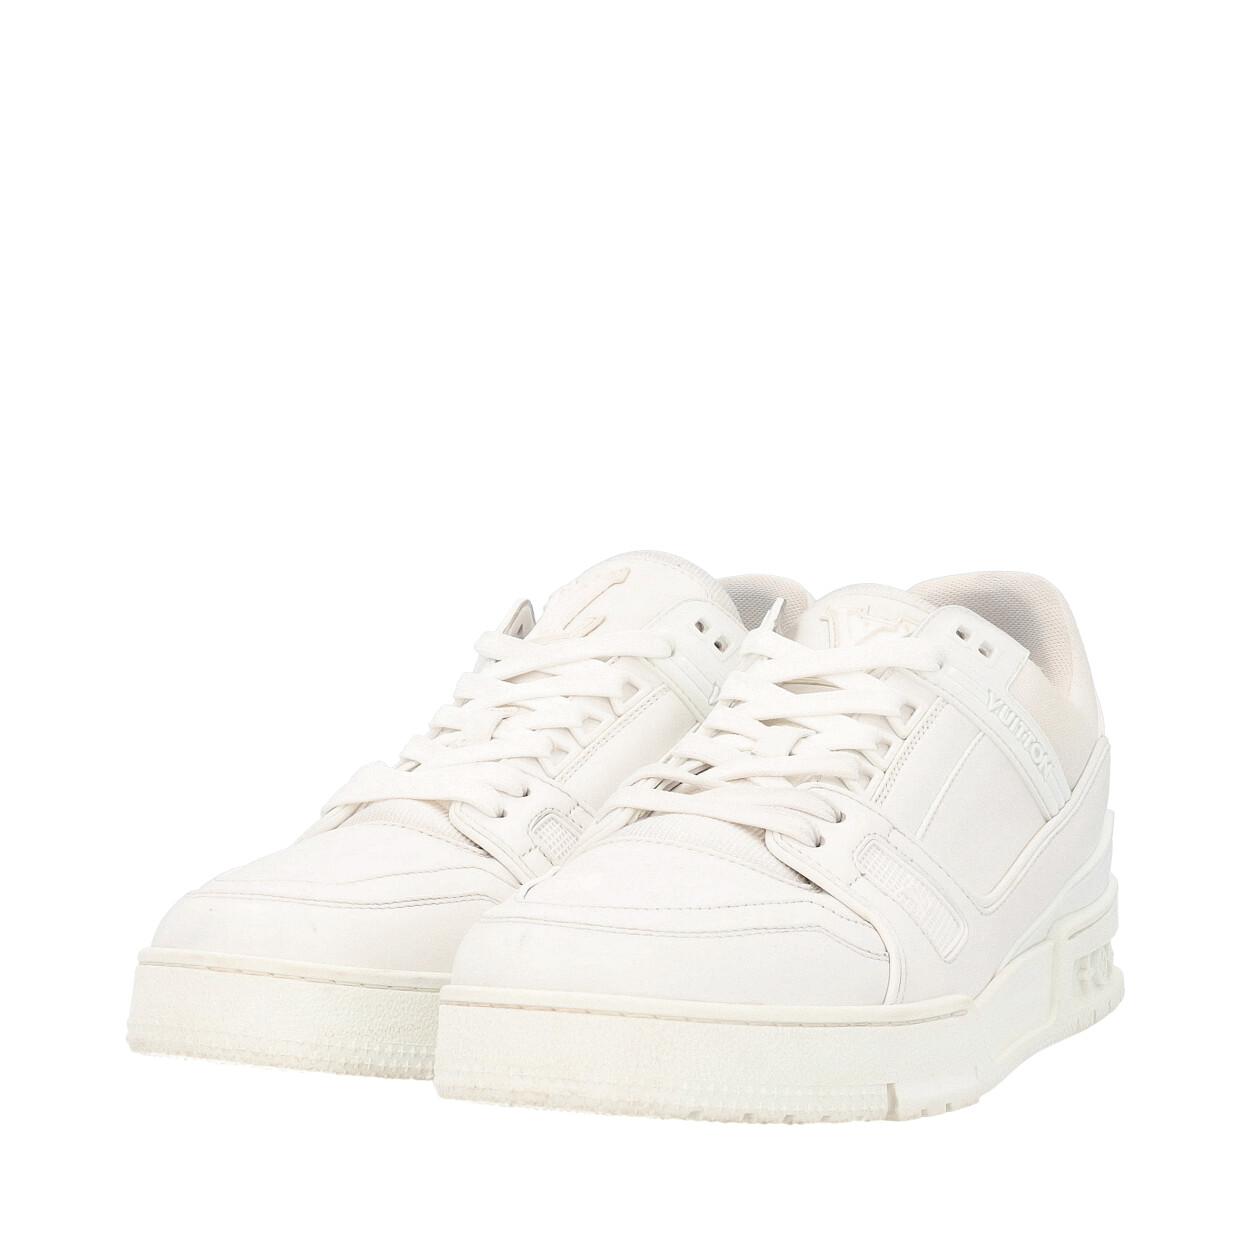 LOUIS VUITTON Leather LV Trainer Sneakers White